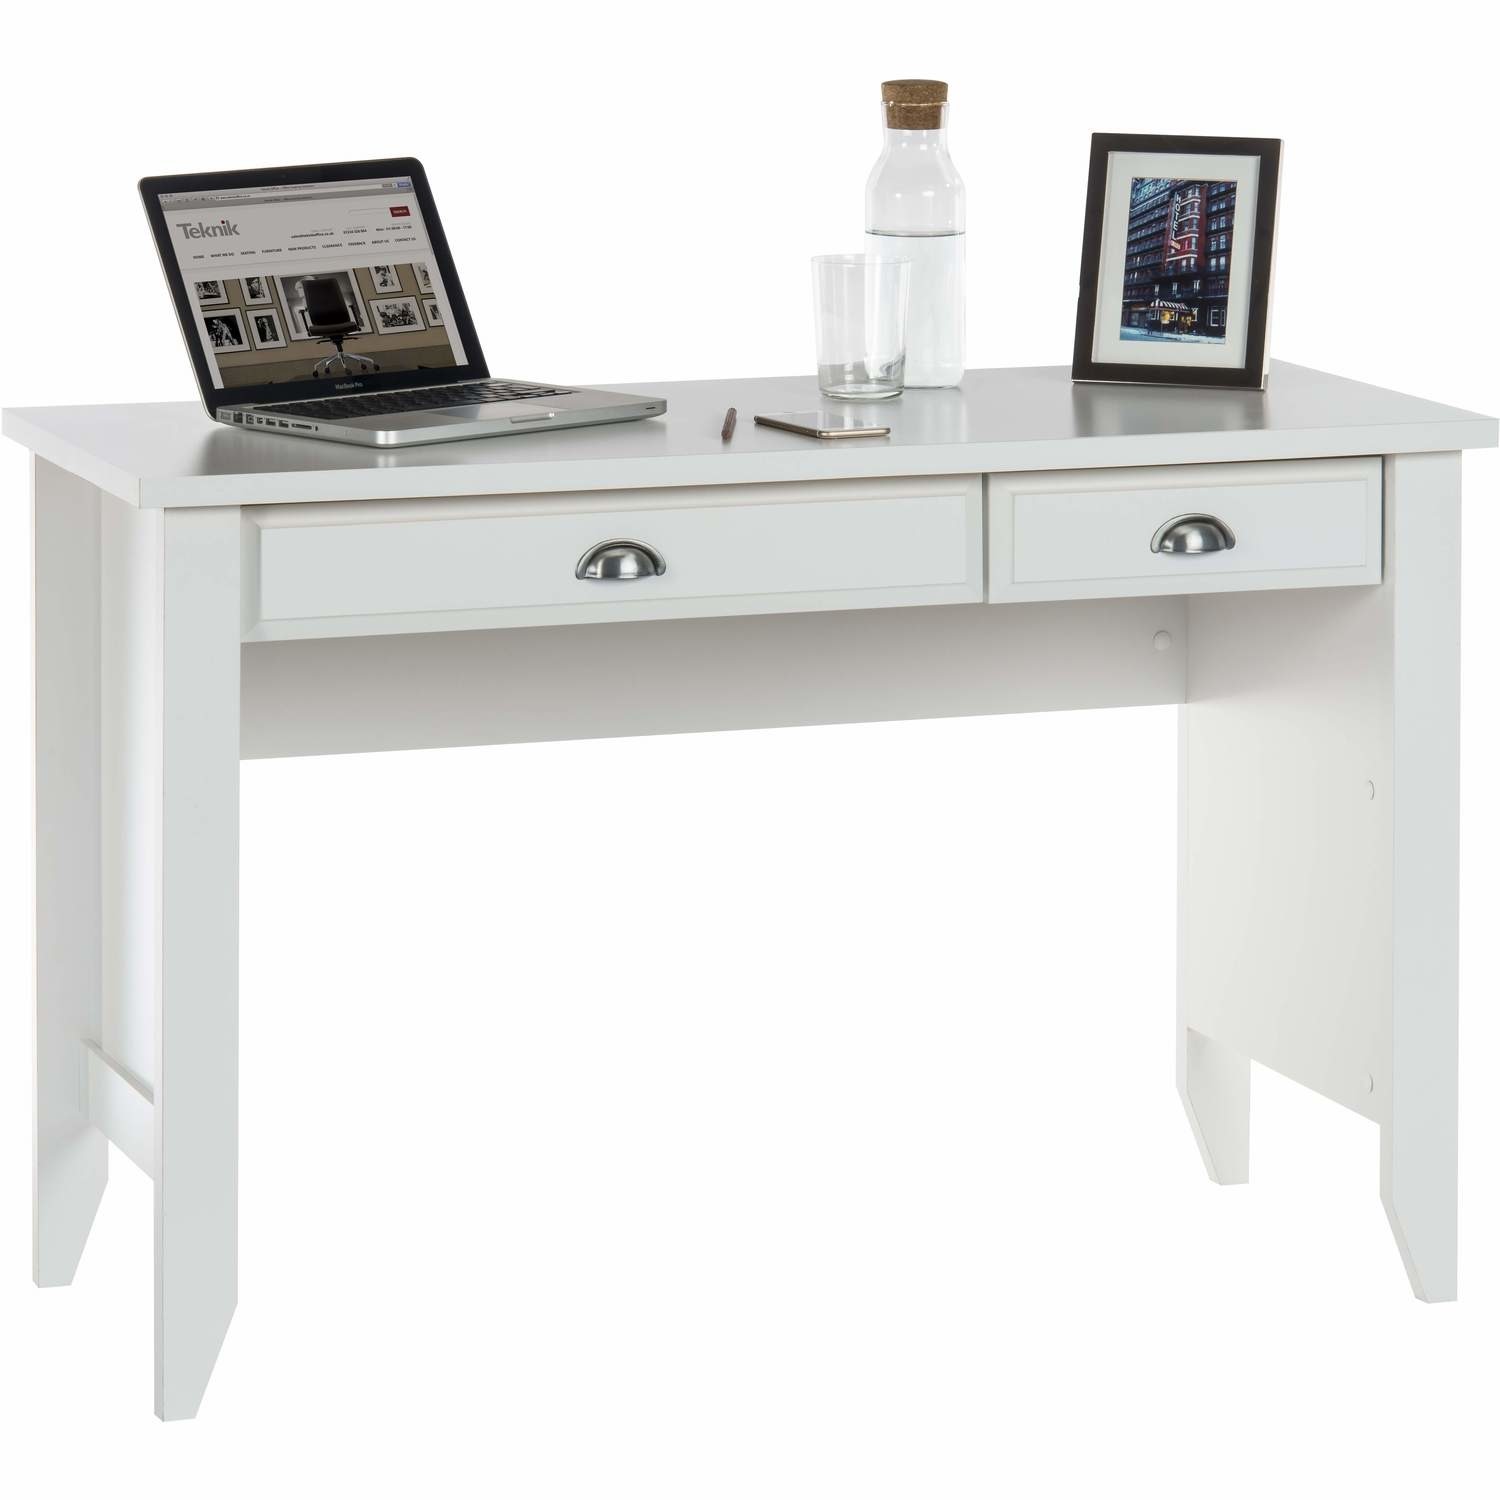 Photo of White wooden desk with drawers - teknik office